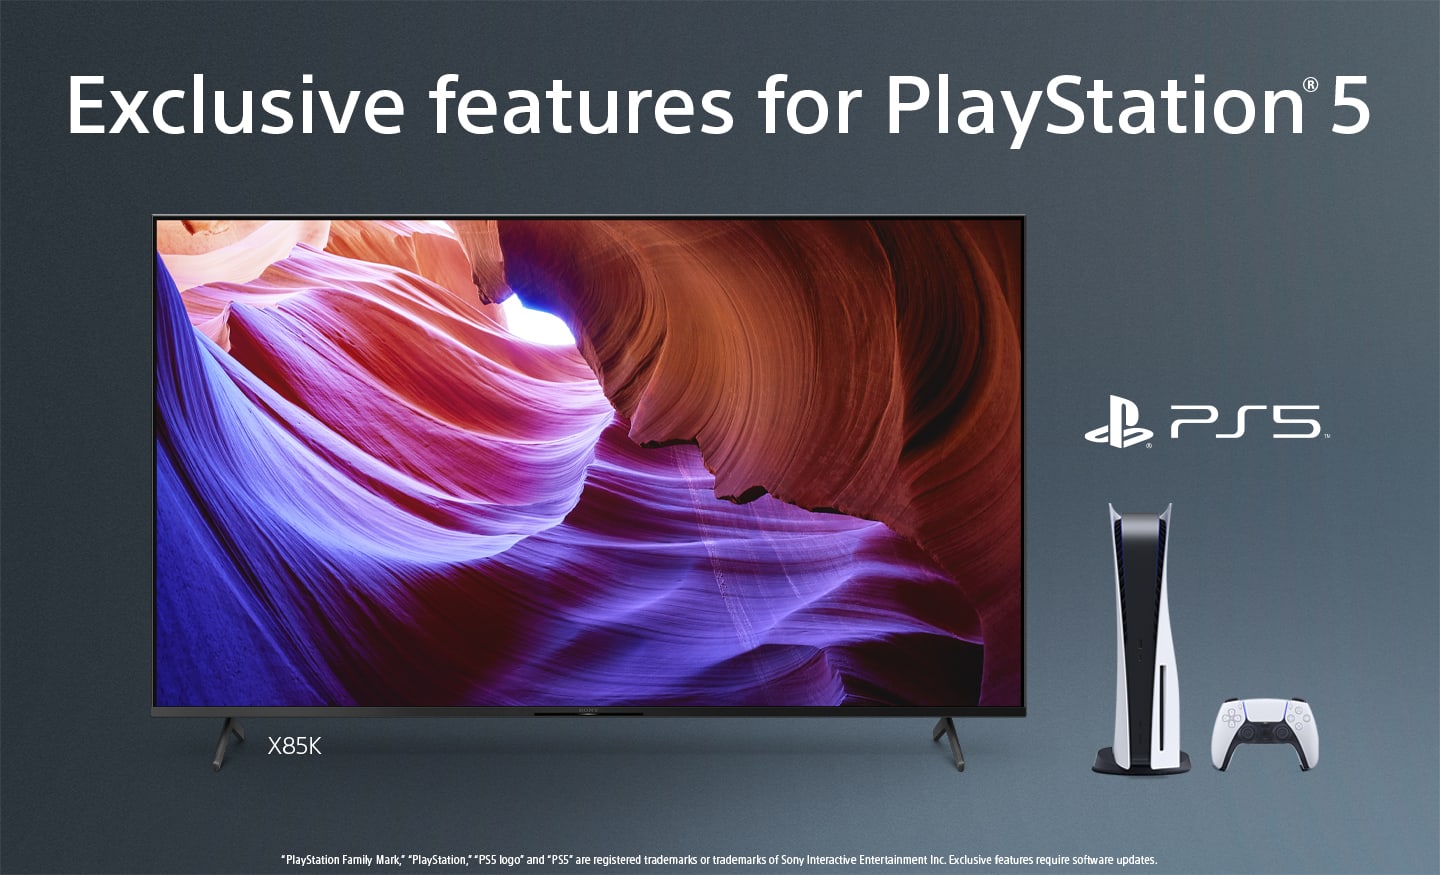 Exclusive features for PS5 on Sony TVs